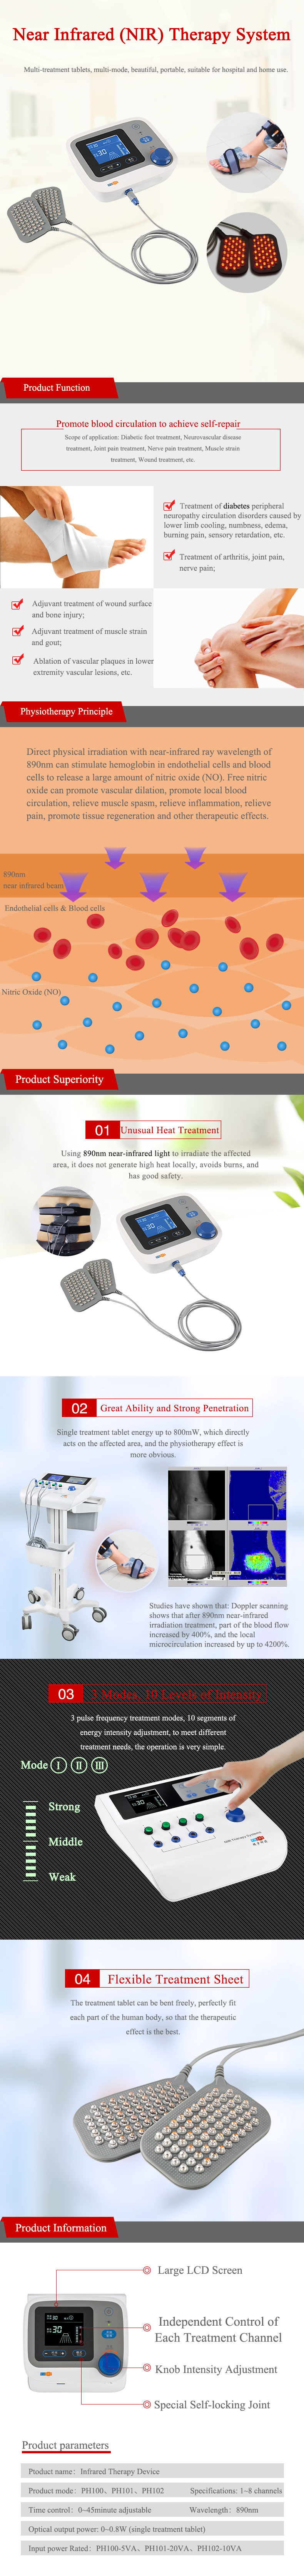 the Diabetic Neuropathy Therapy Device.jpg